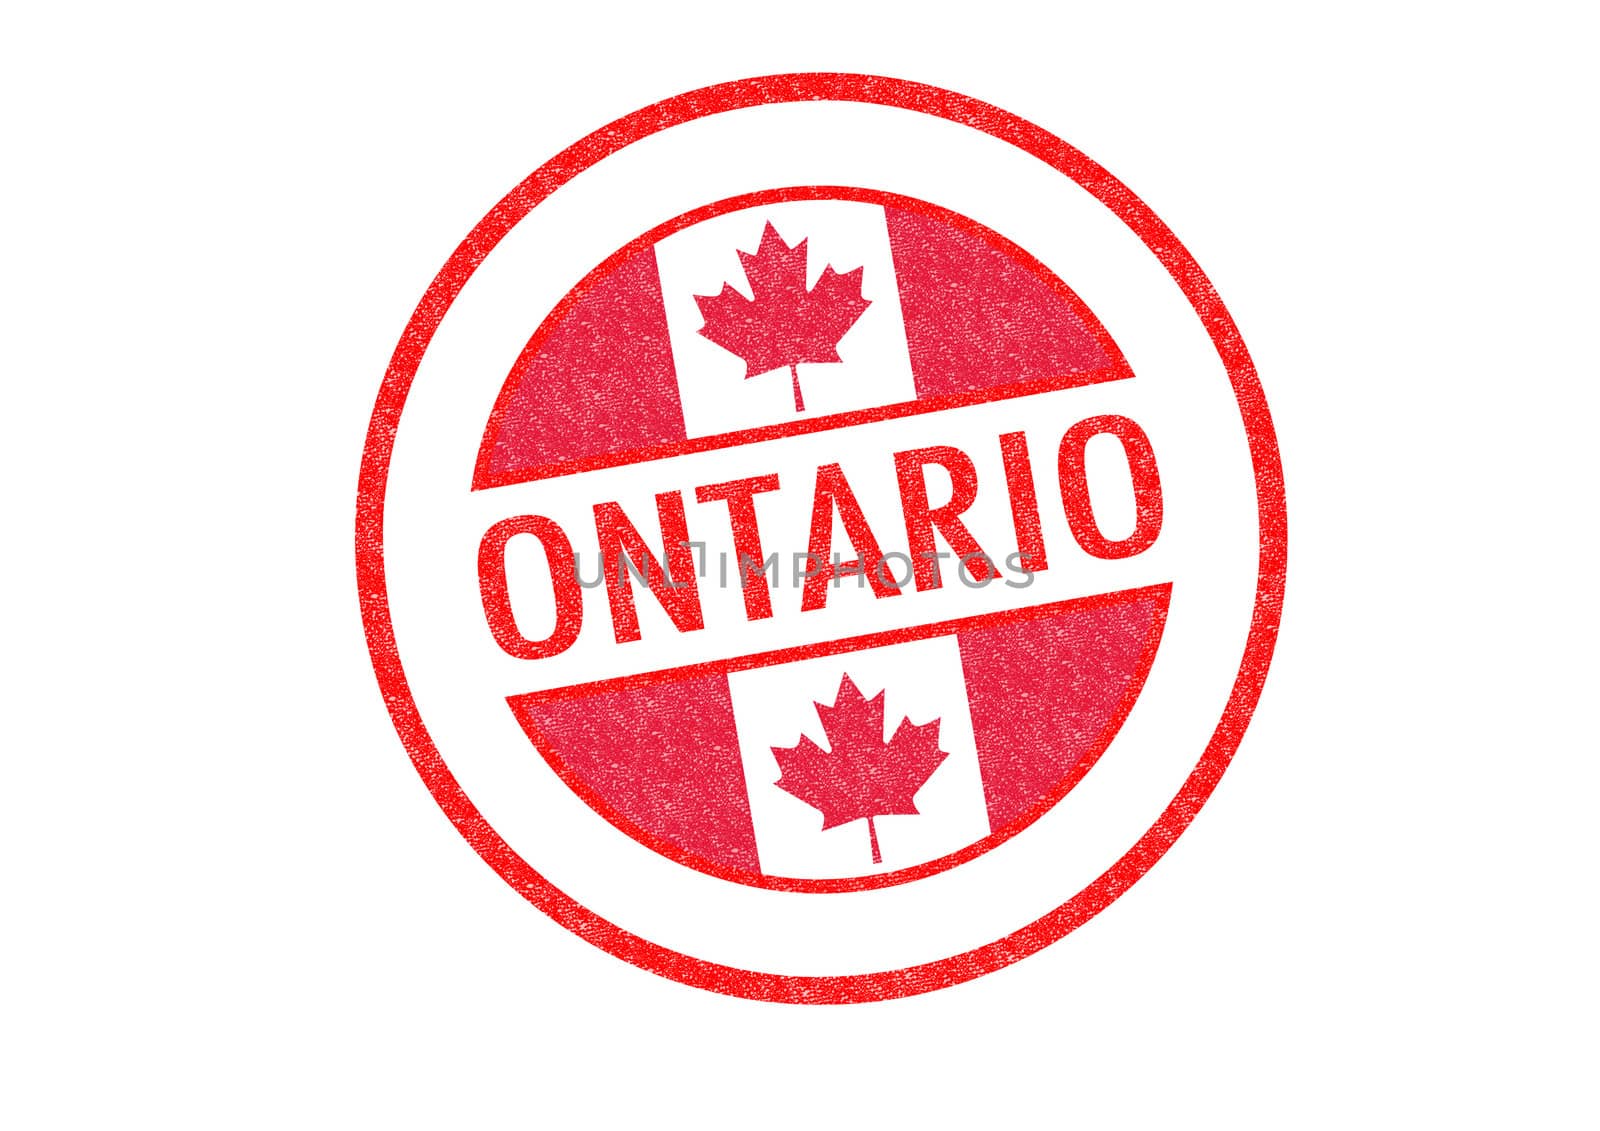 Passport-style ONTARIO rubber stamp over a white background.